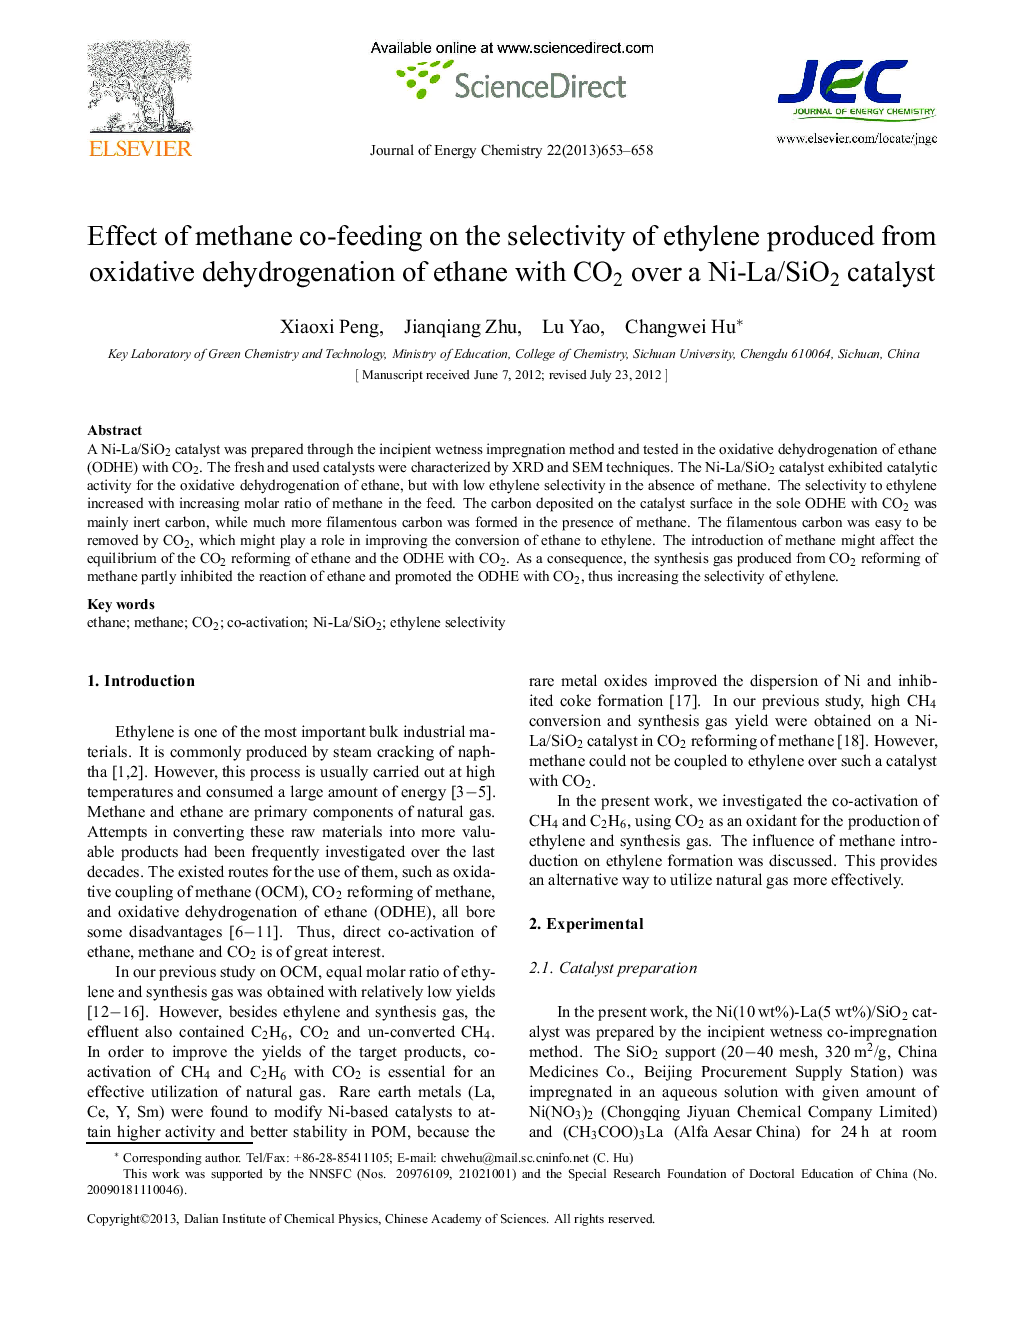 Effect of methane co-feeding on the selectivity of ethylene produced from oxidative dehydrogenation of ethane with CO2 over a Ni-La/SiO2 catalyst 